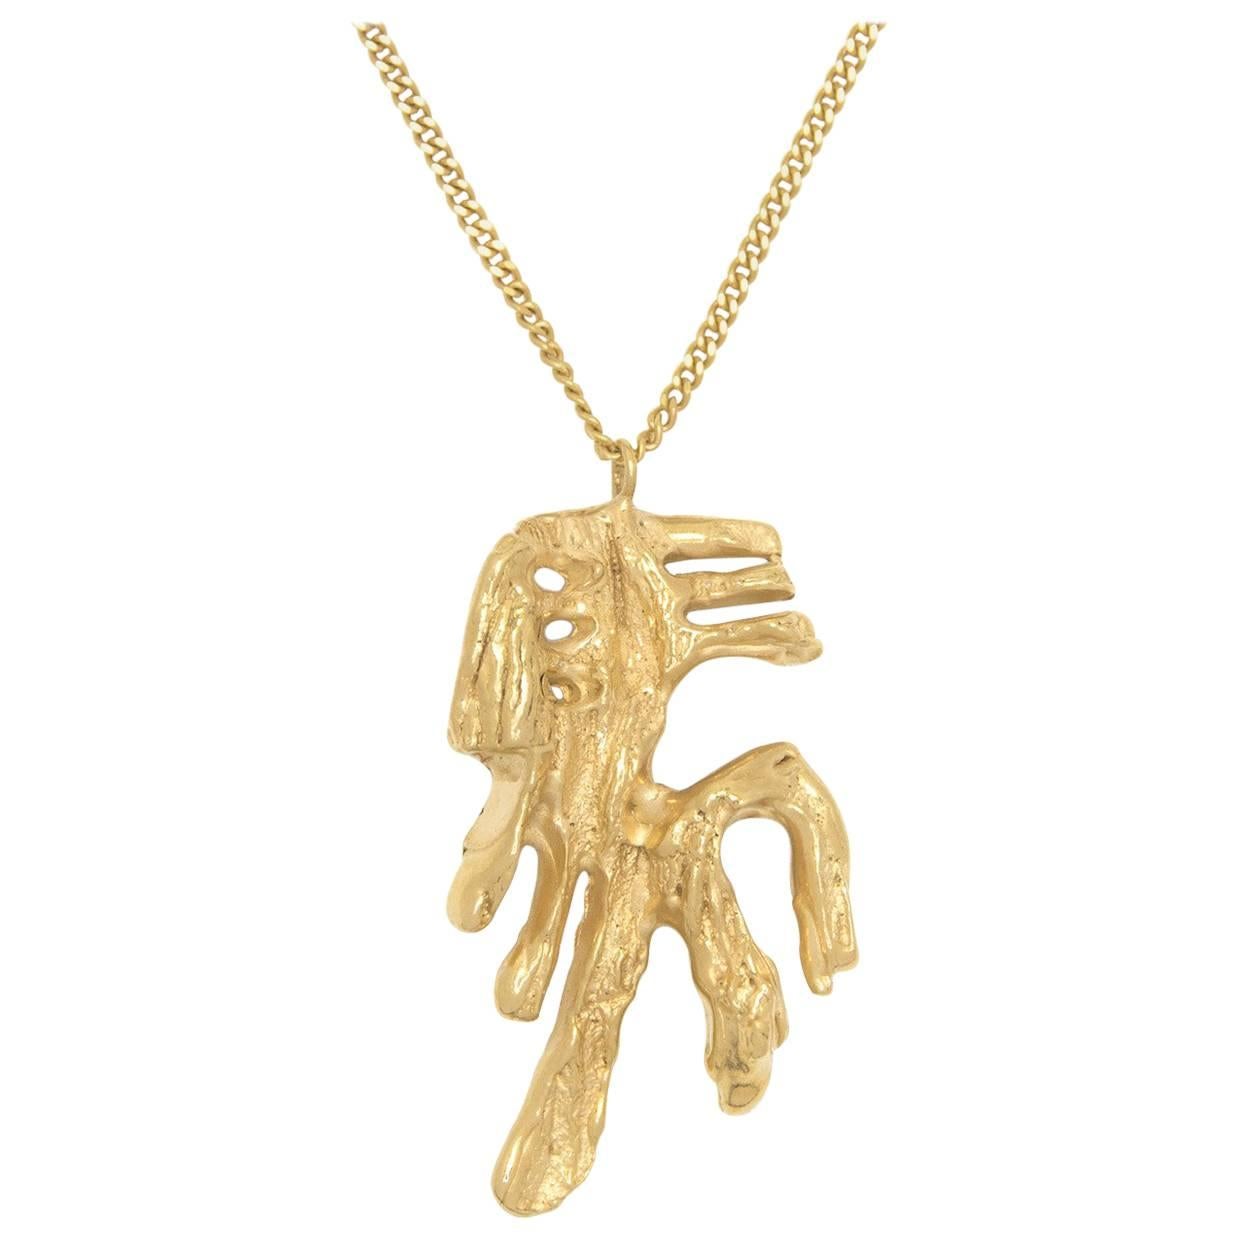 Loveness Lee - Chinese Zodiac Horse - Horoscope Gold Pendant Necklace For Sale